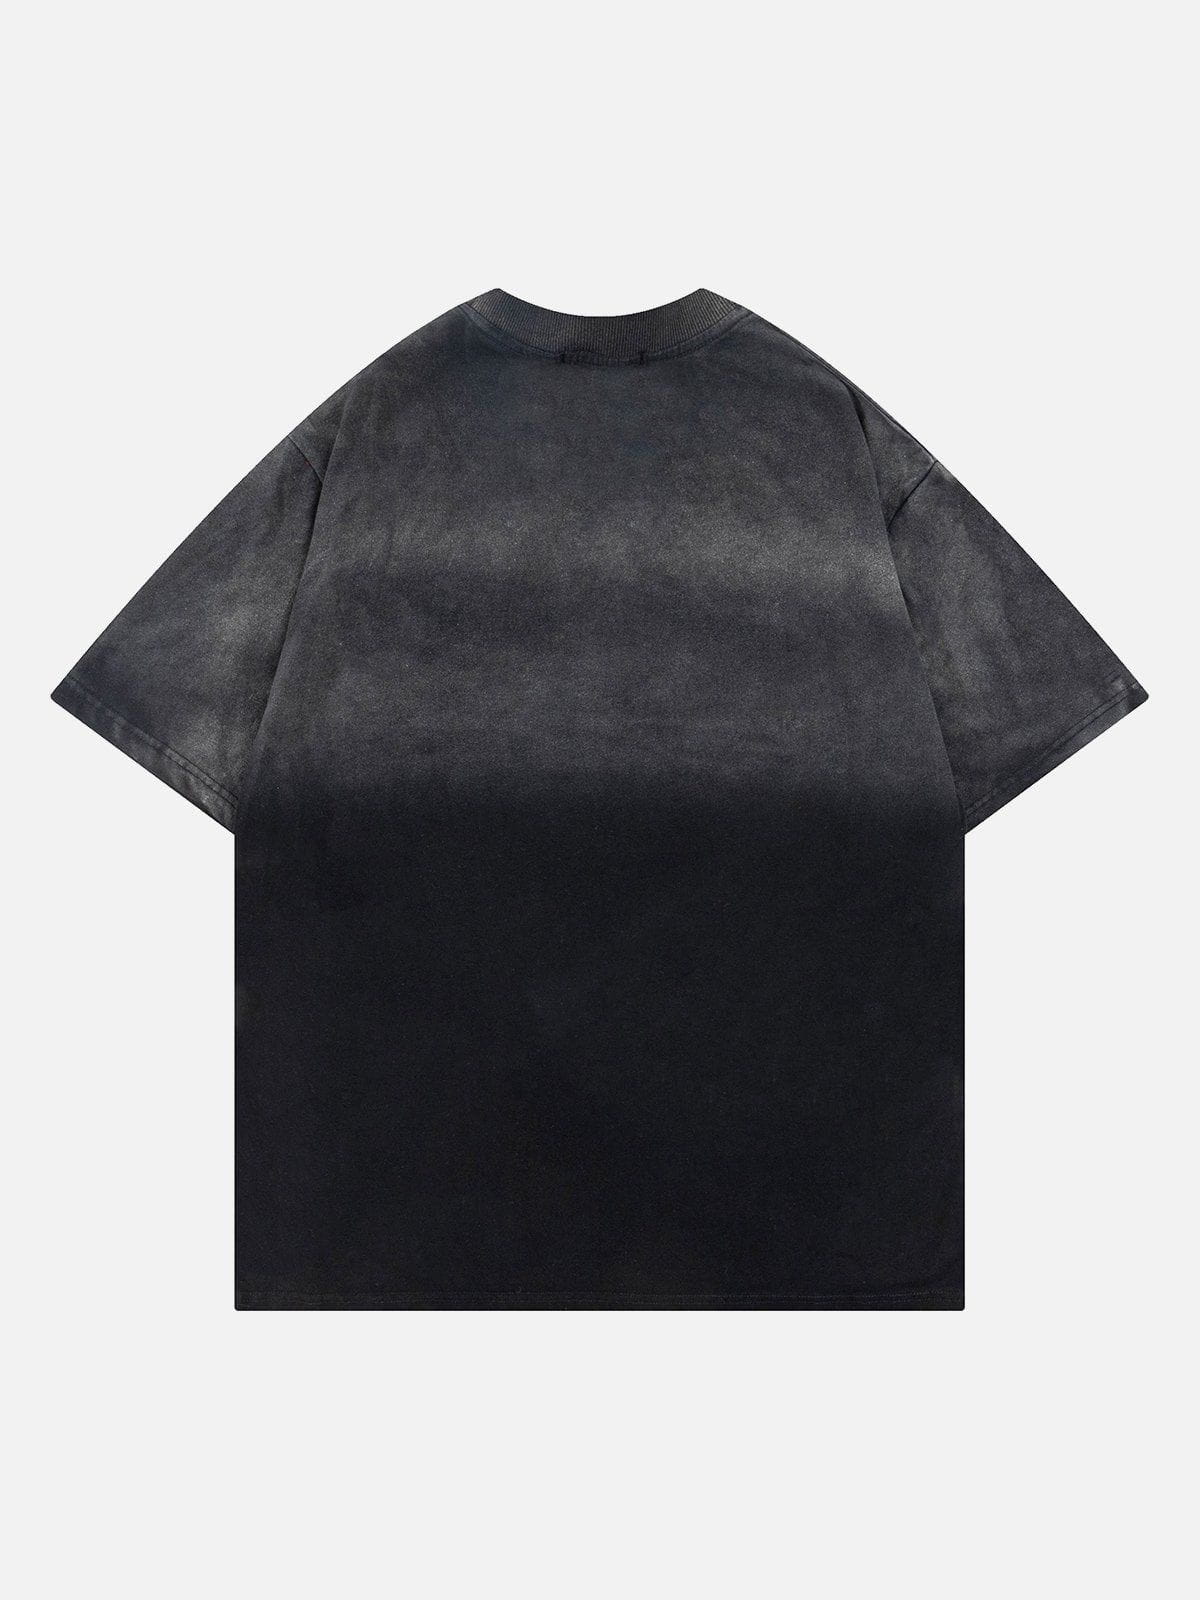 Sneakerland™ - Letter Print Gradient Washed Tee